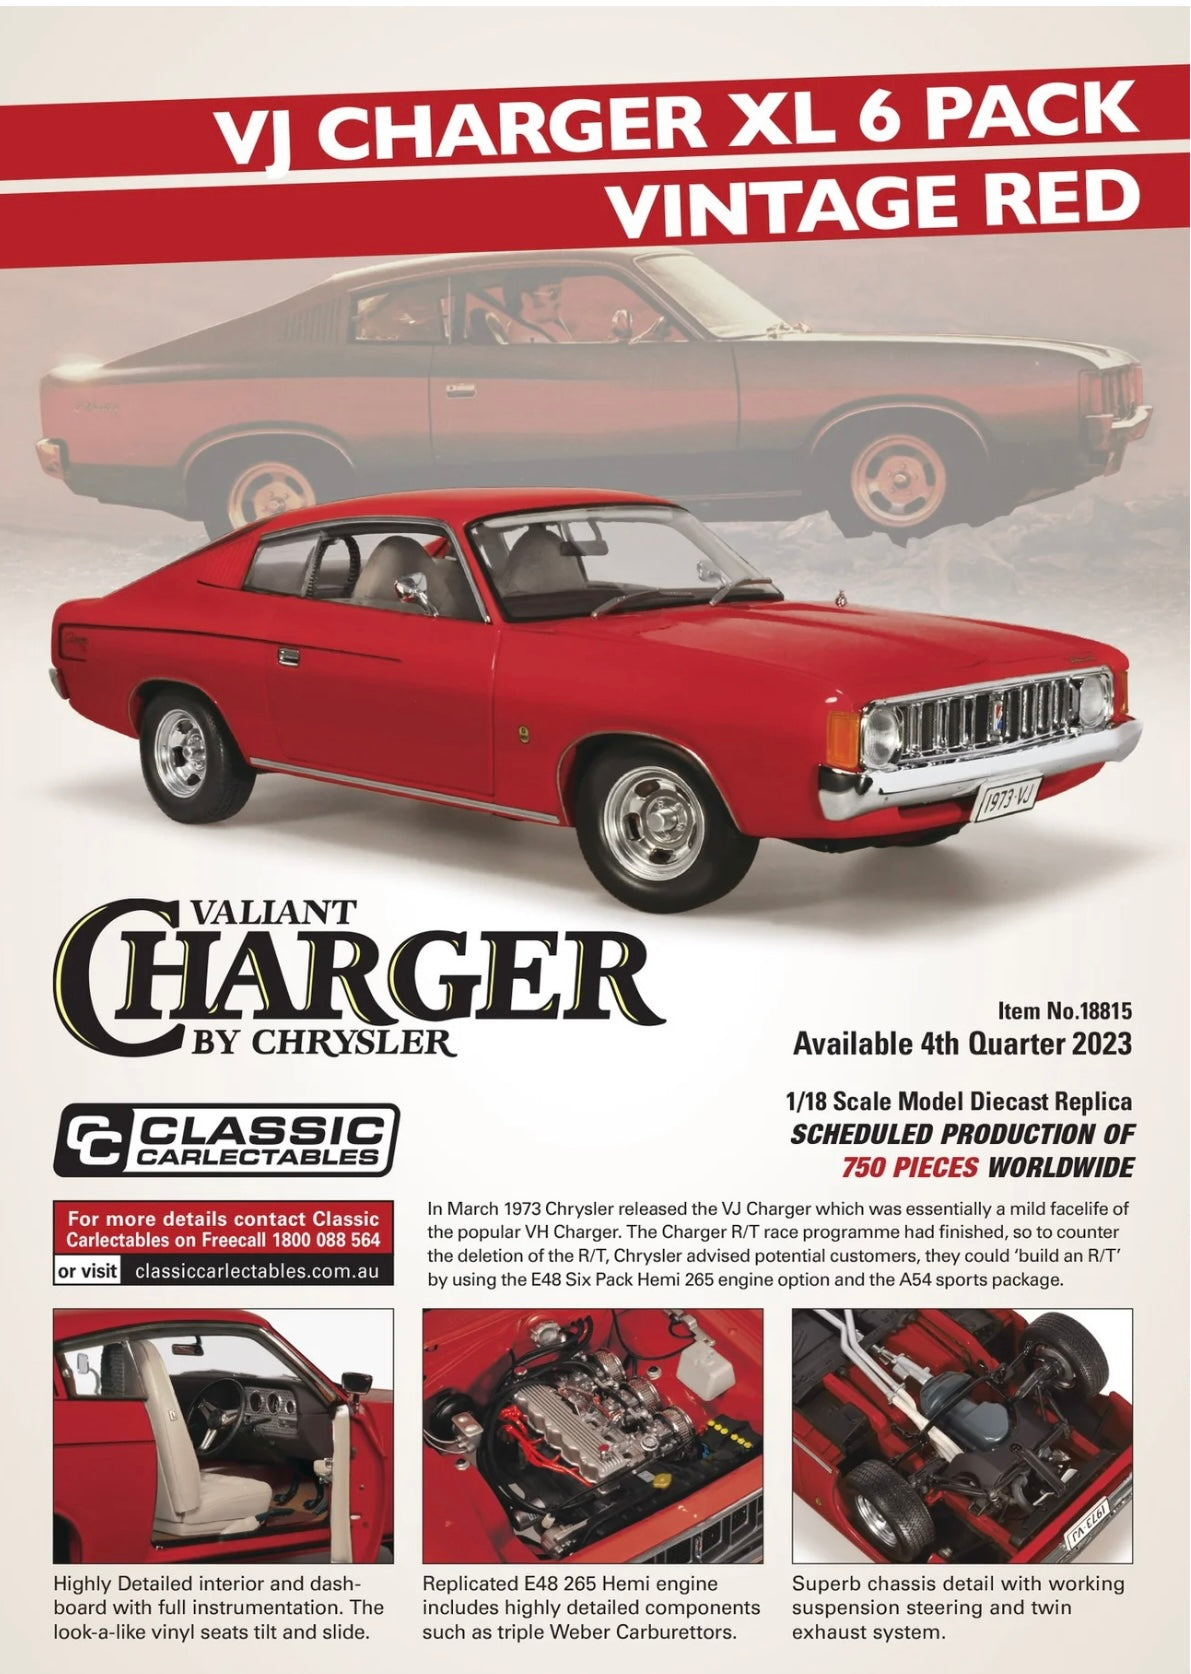 1:18 VJ Charger XL 6 Pack Vintage Red Classic Carlectables